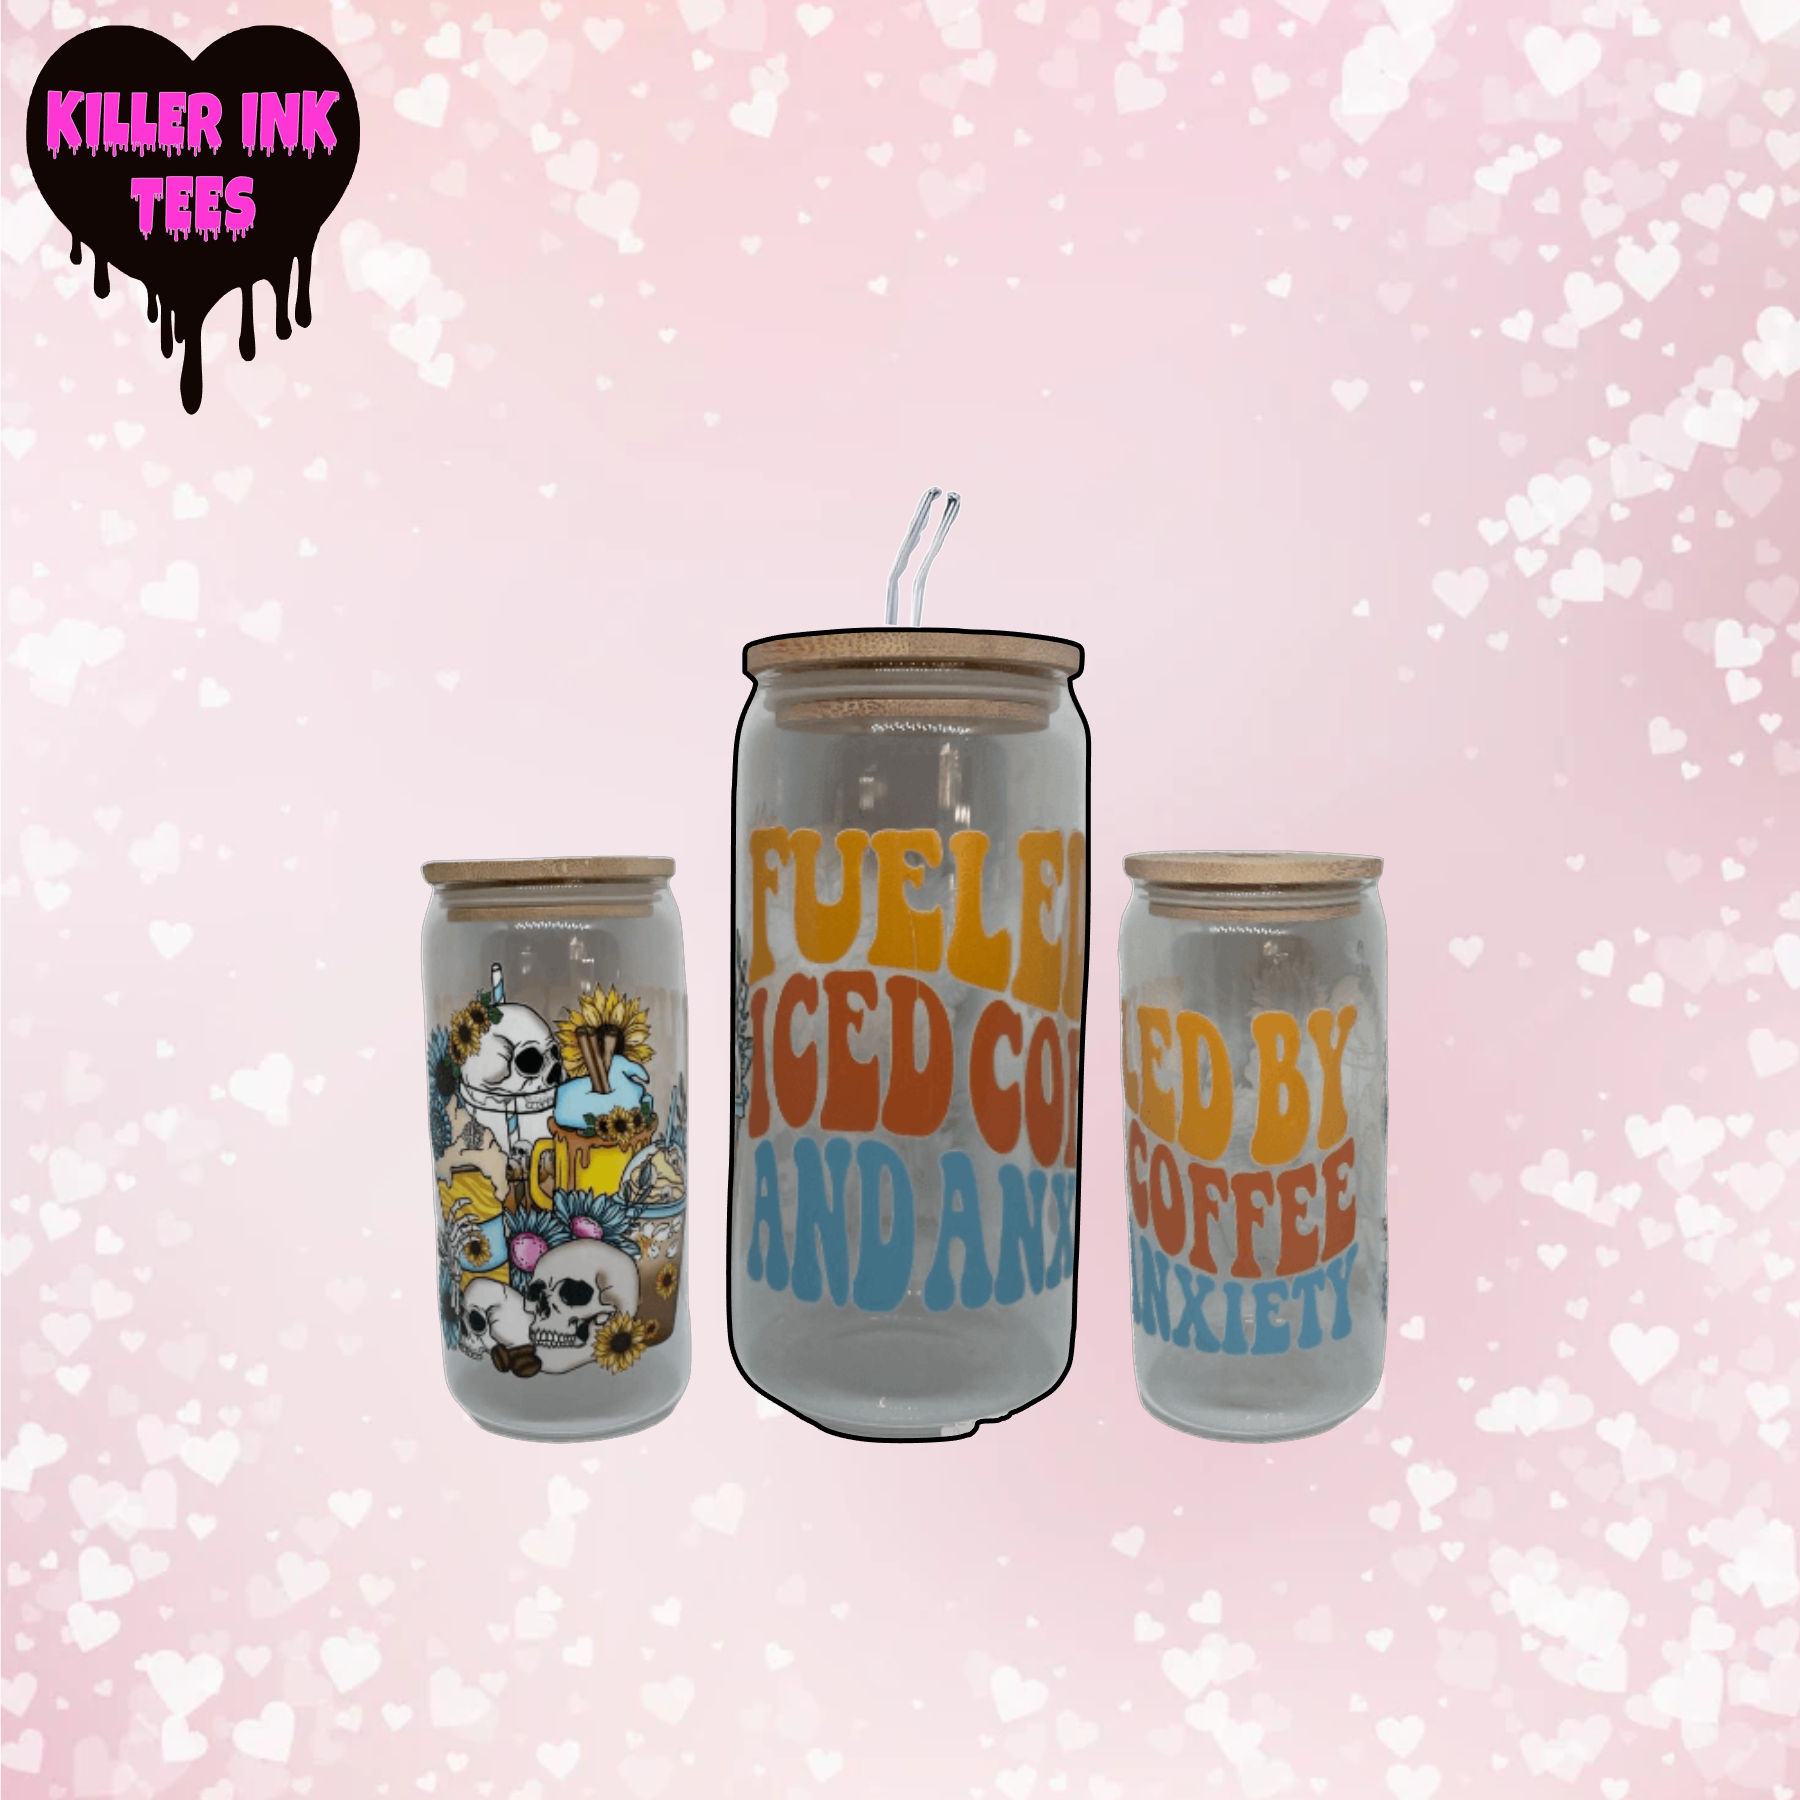 Fueled by Iced Coffee & Anxiety Glass Can Cold Drink Cup w/Bamboo Lid –  Makayla Rose Creations Inc.